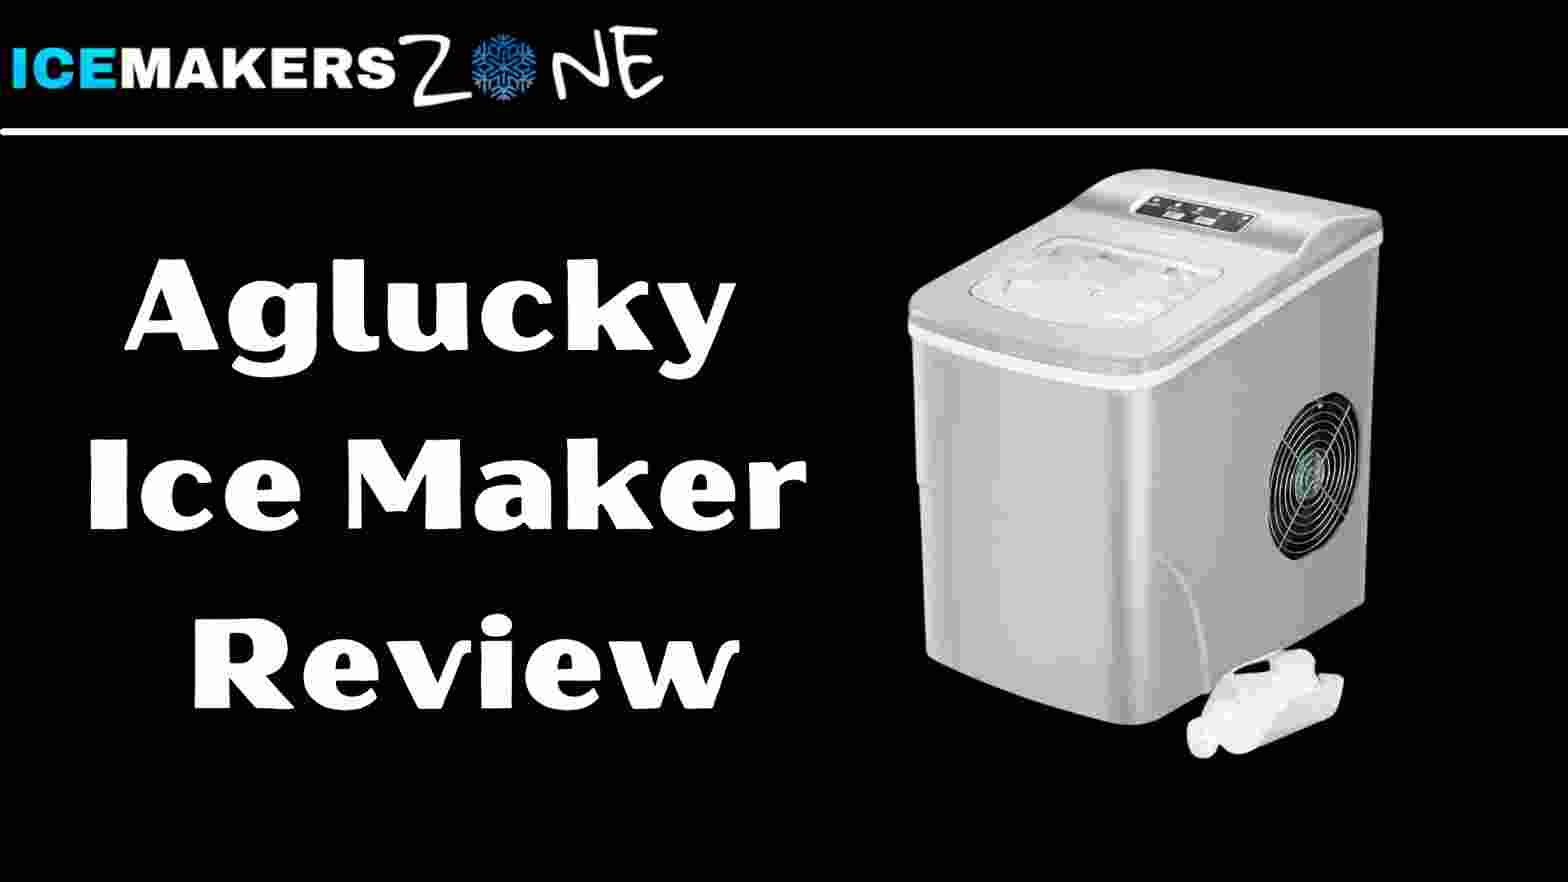 Aglucky Ice Maker Review